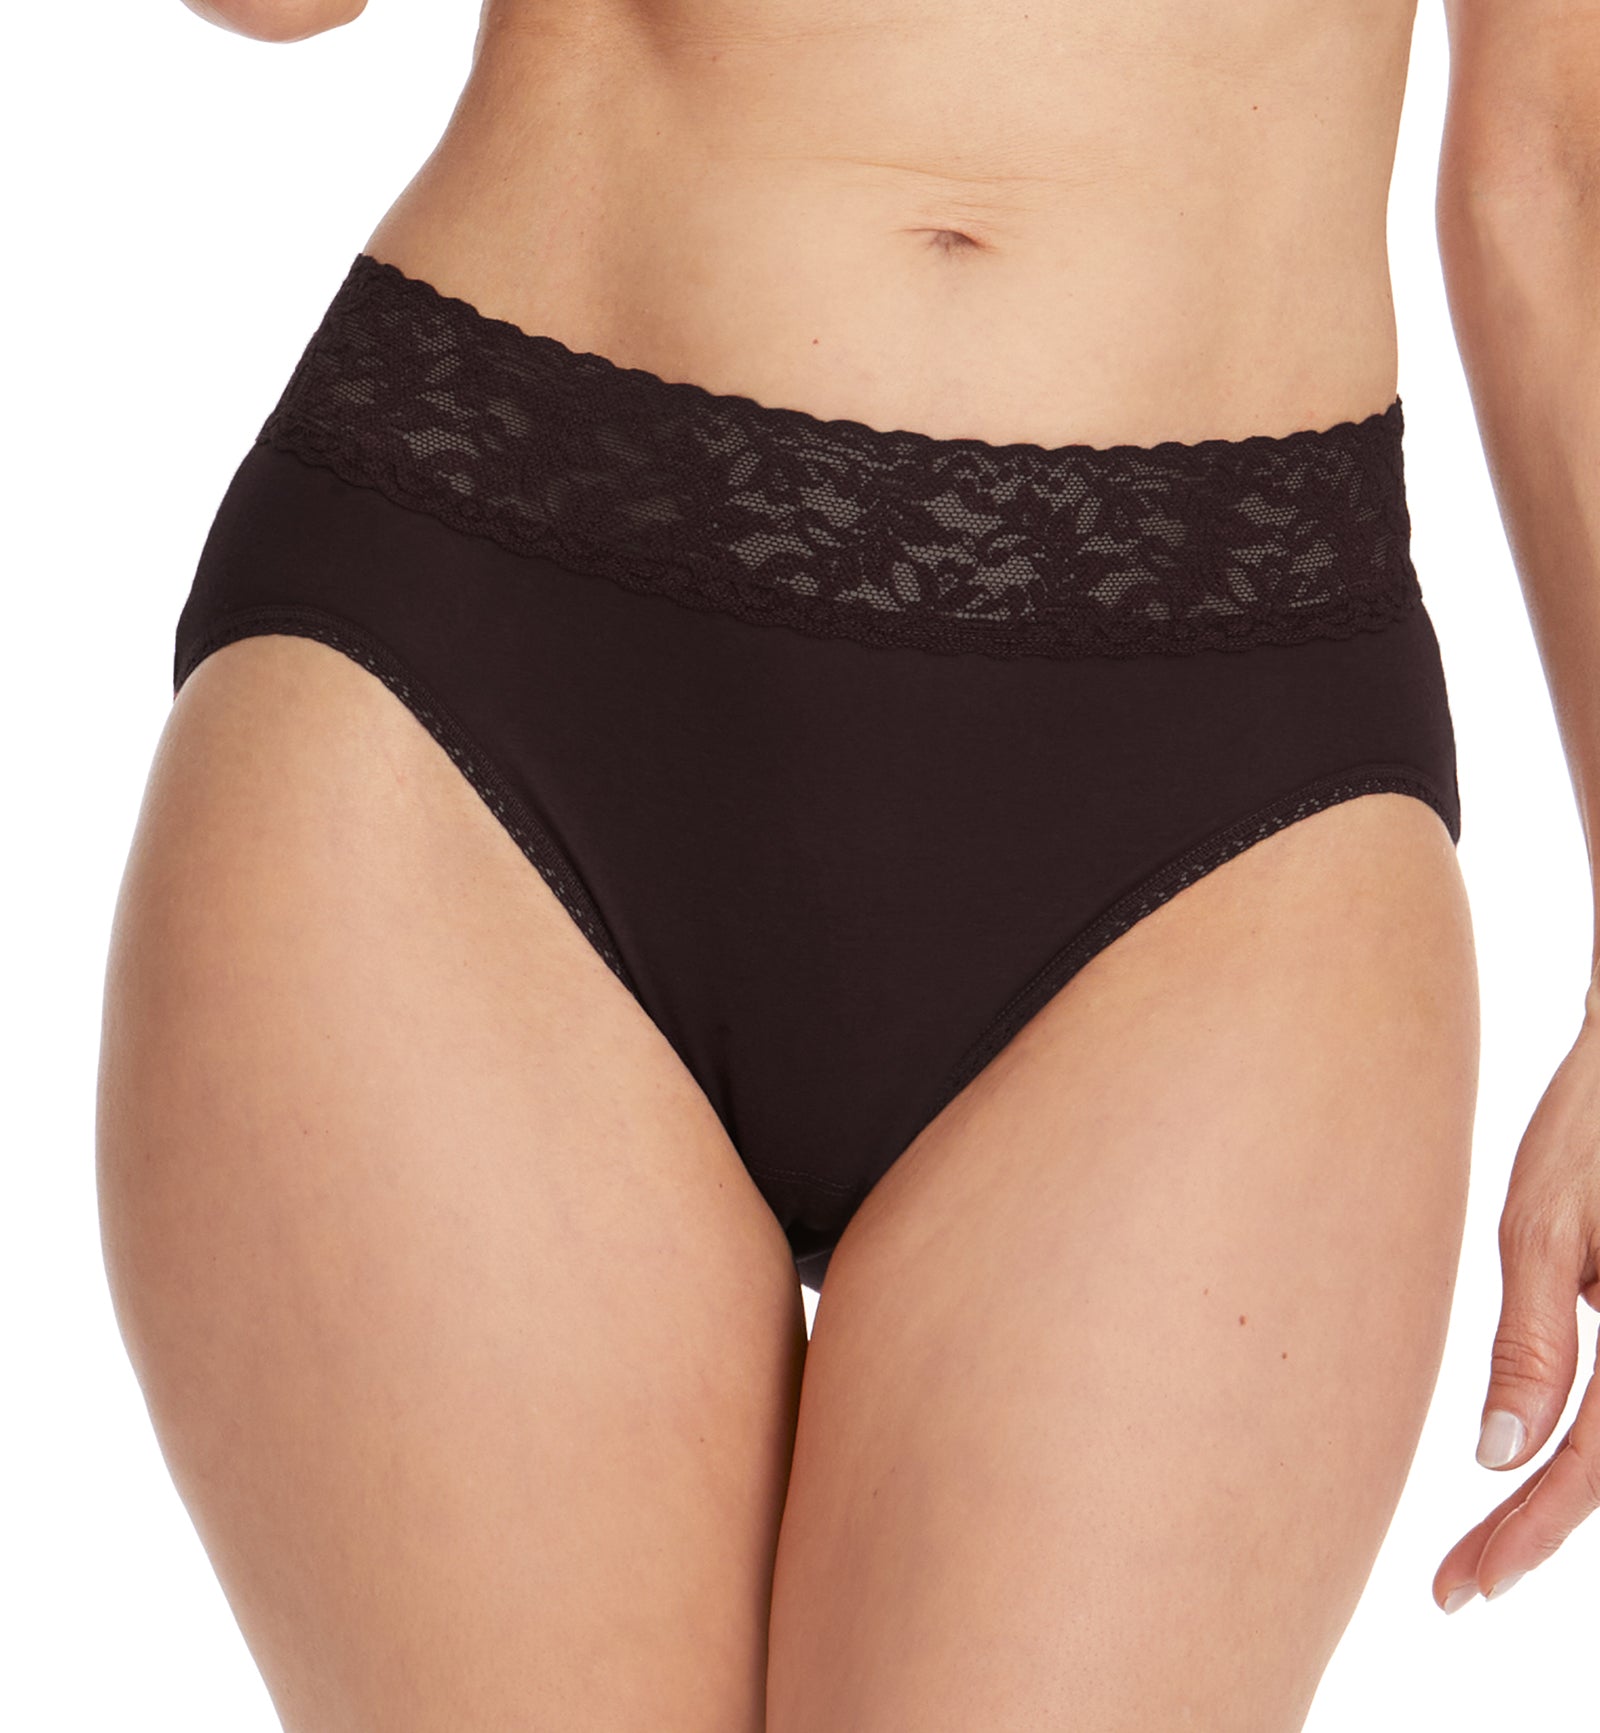 Hanky Panky Cotton French Brief with Lace (892461),Small,Black - Black,Small